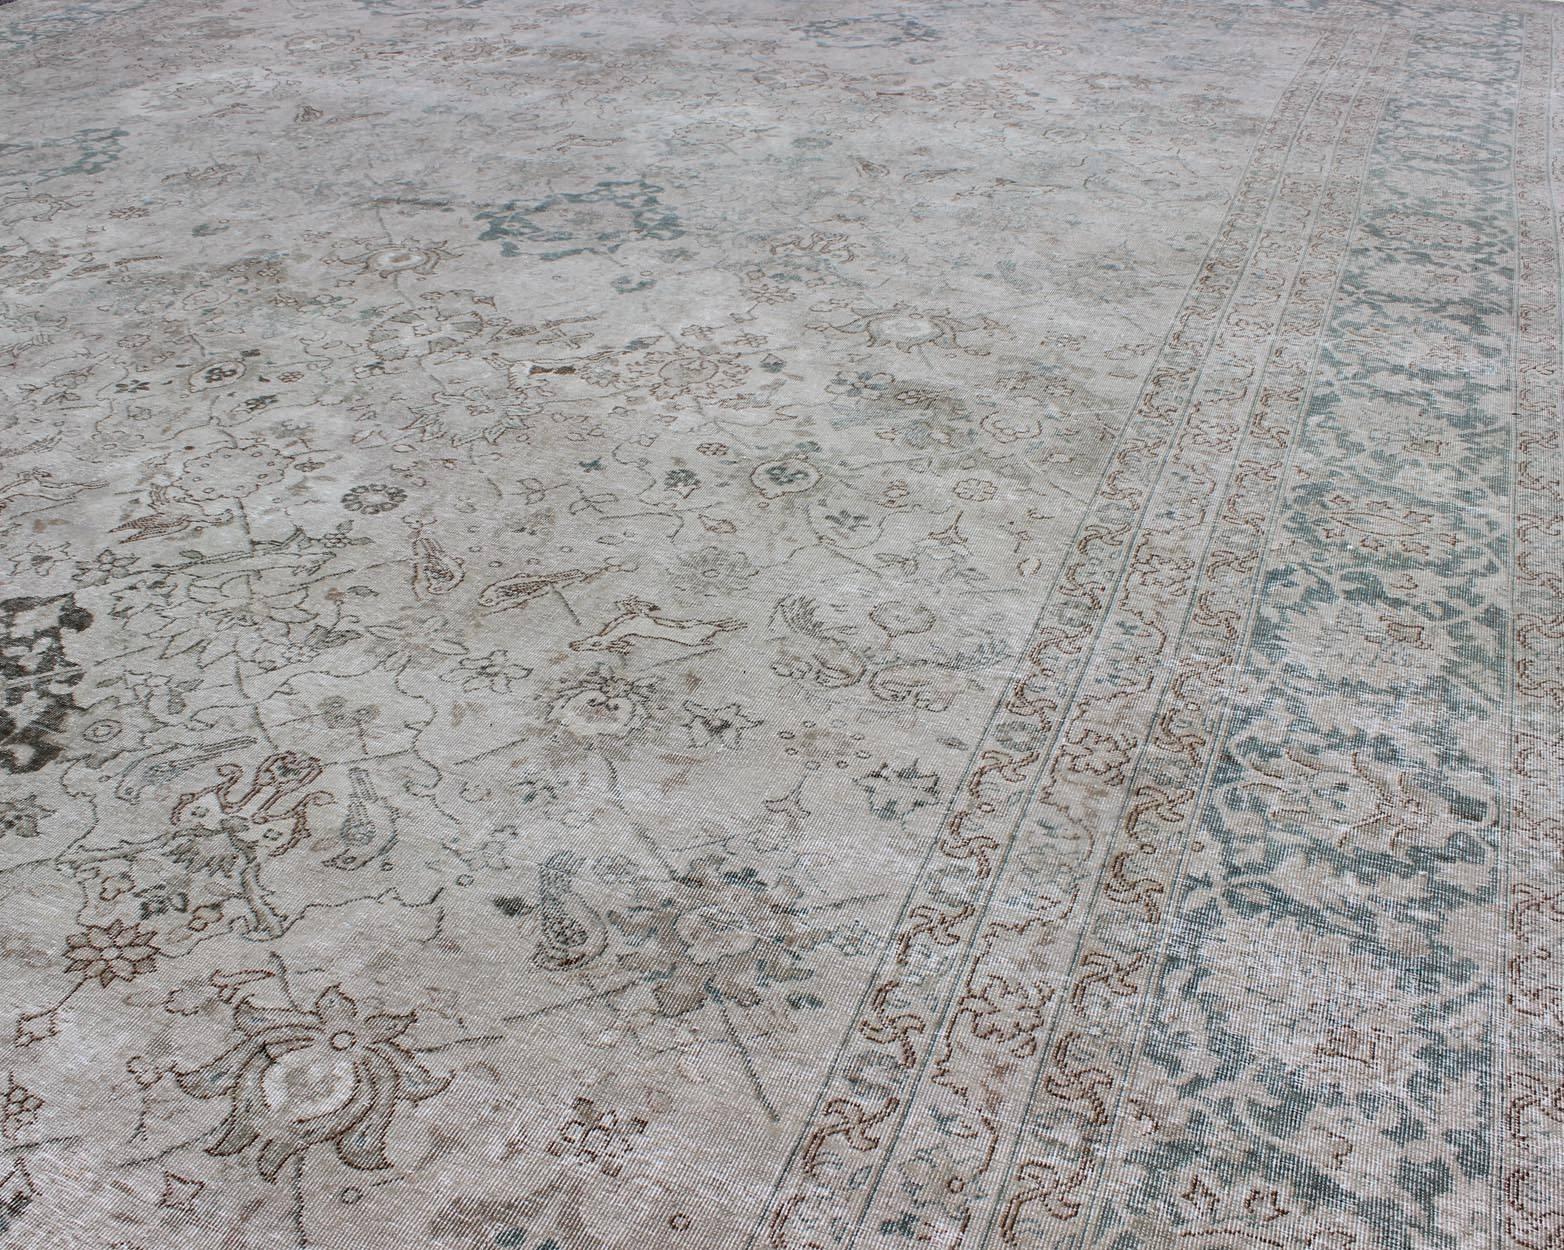 Hand-Knotted All-Over Design Antique Turkish Sivas Rug in Gray, Ivory, and Blue Tones